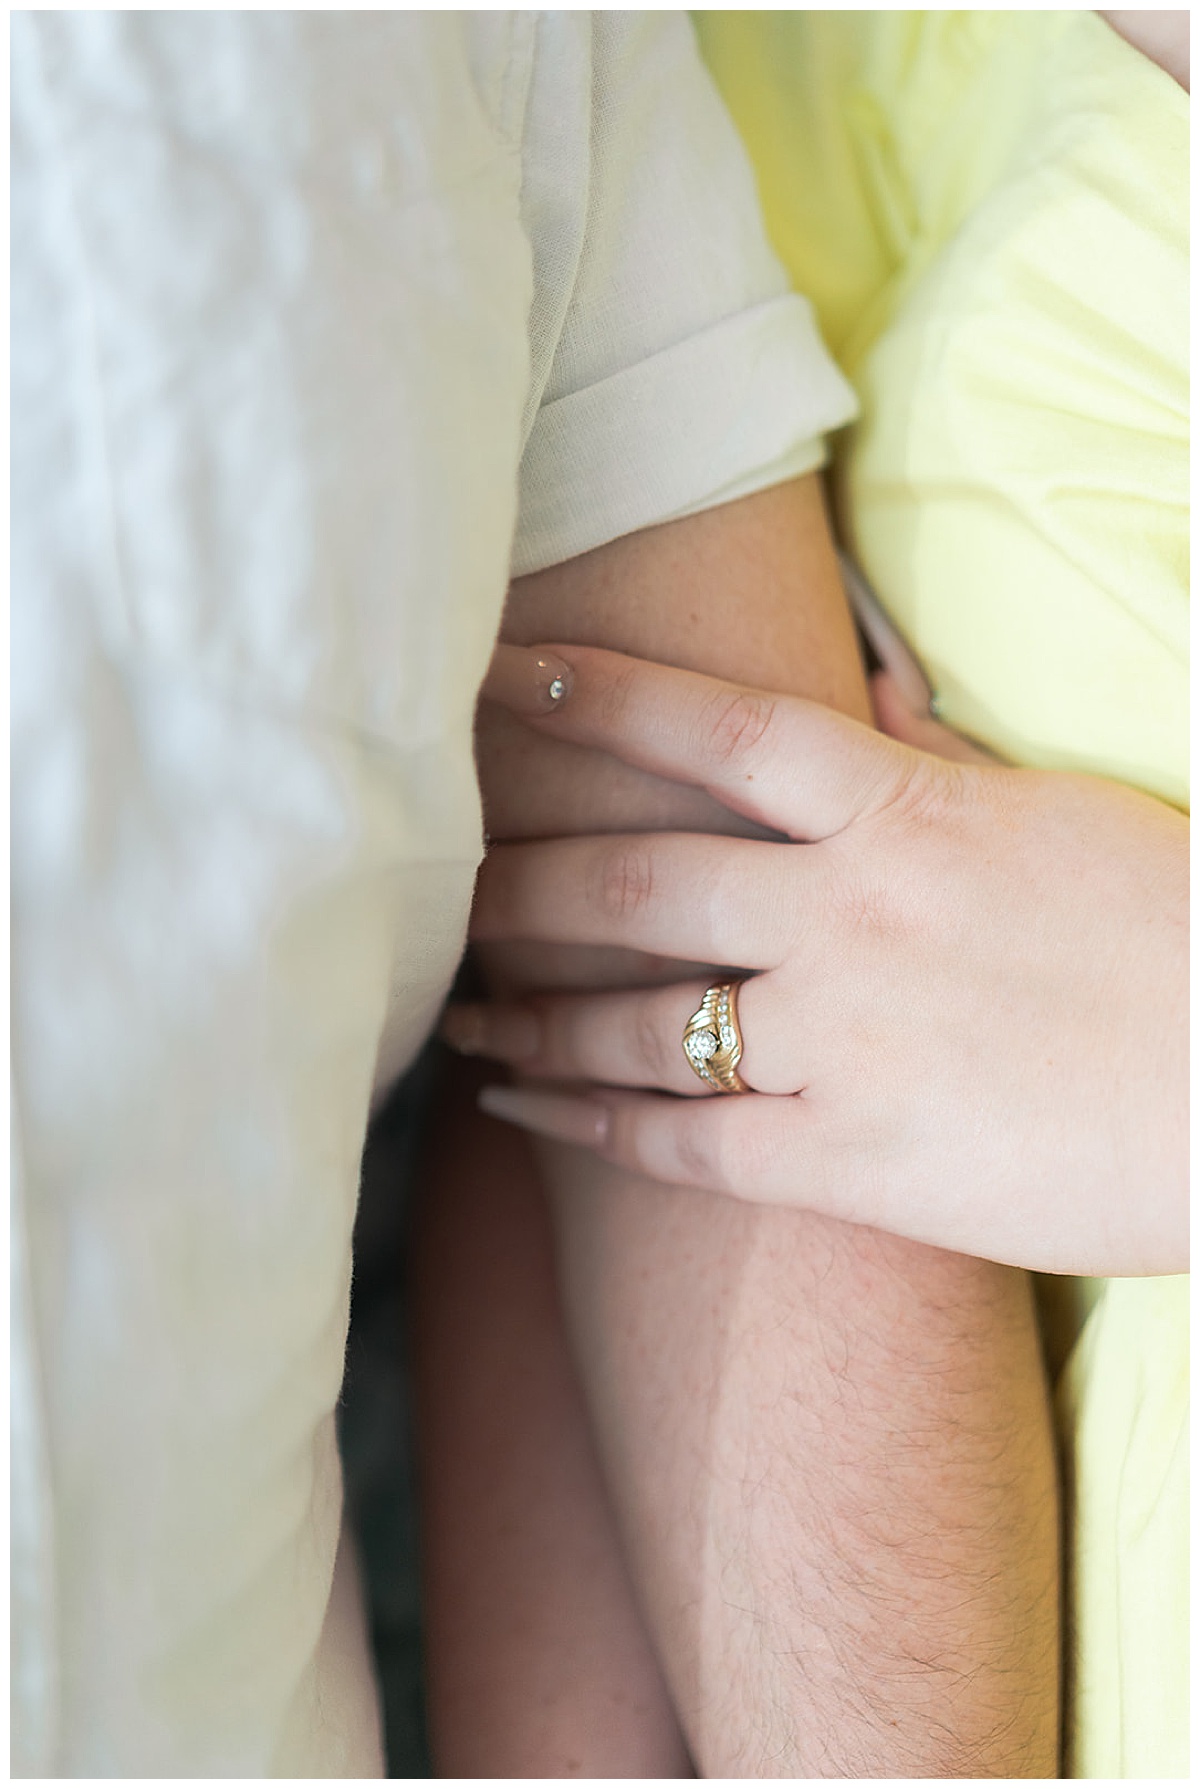 Stunning engagement ring by Swish & Click Photography